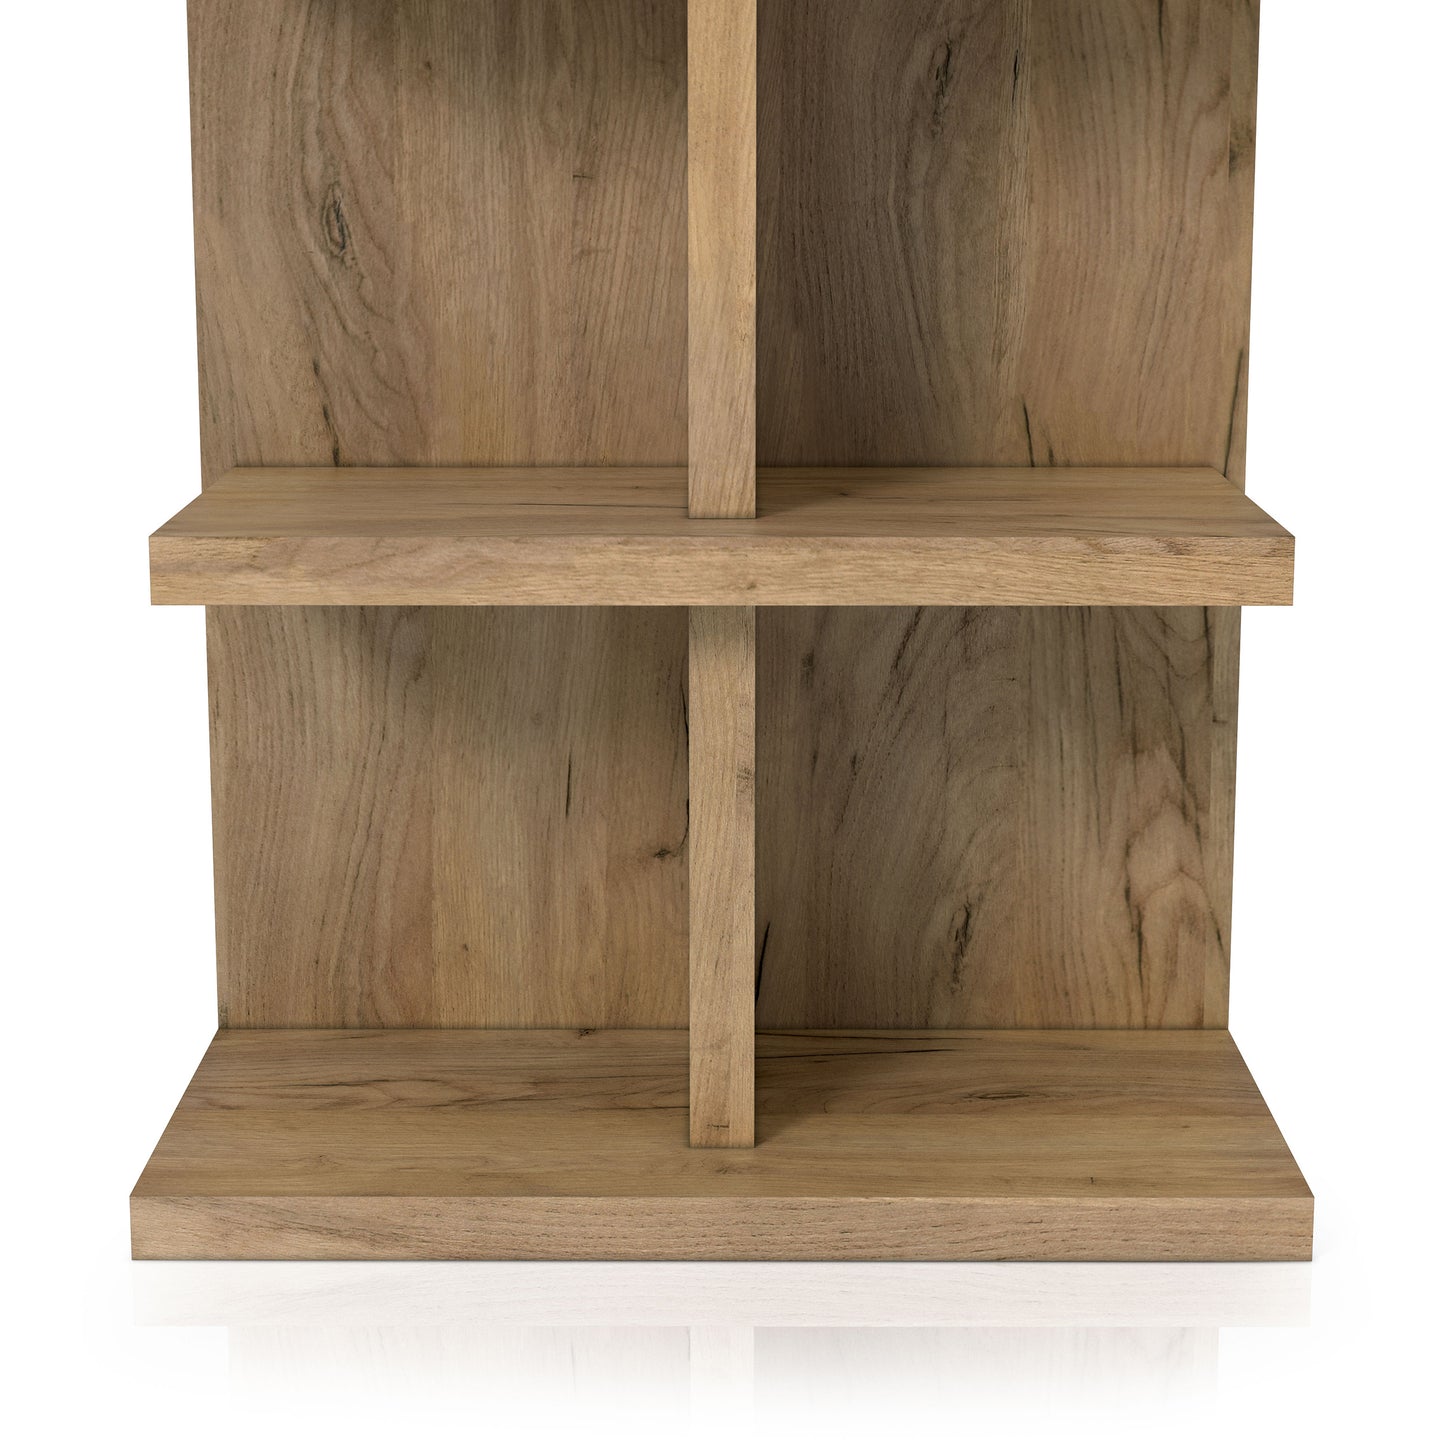 Front-facing lower close-up view of a contemporary light oak eight-shelf bookcase on a white background